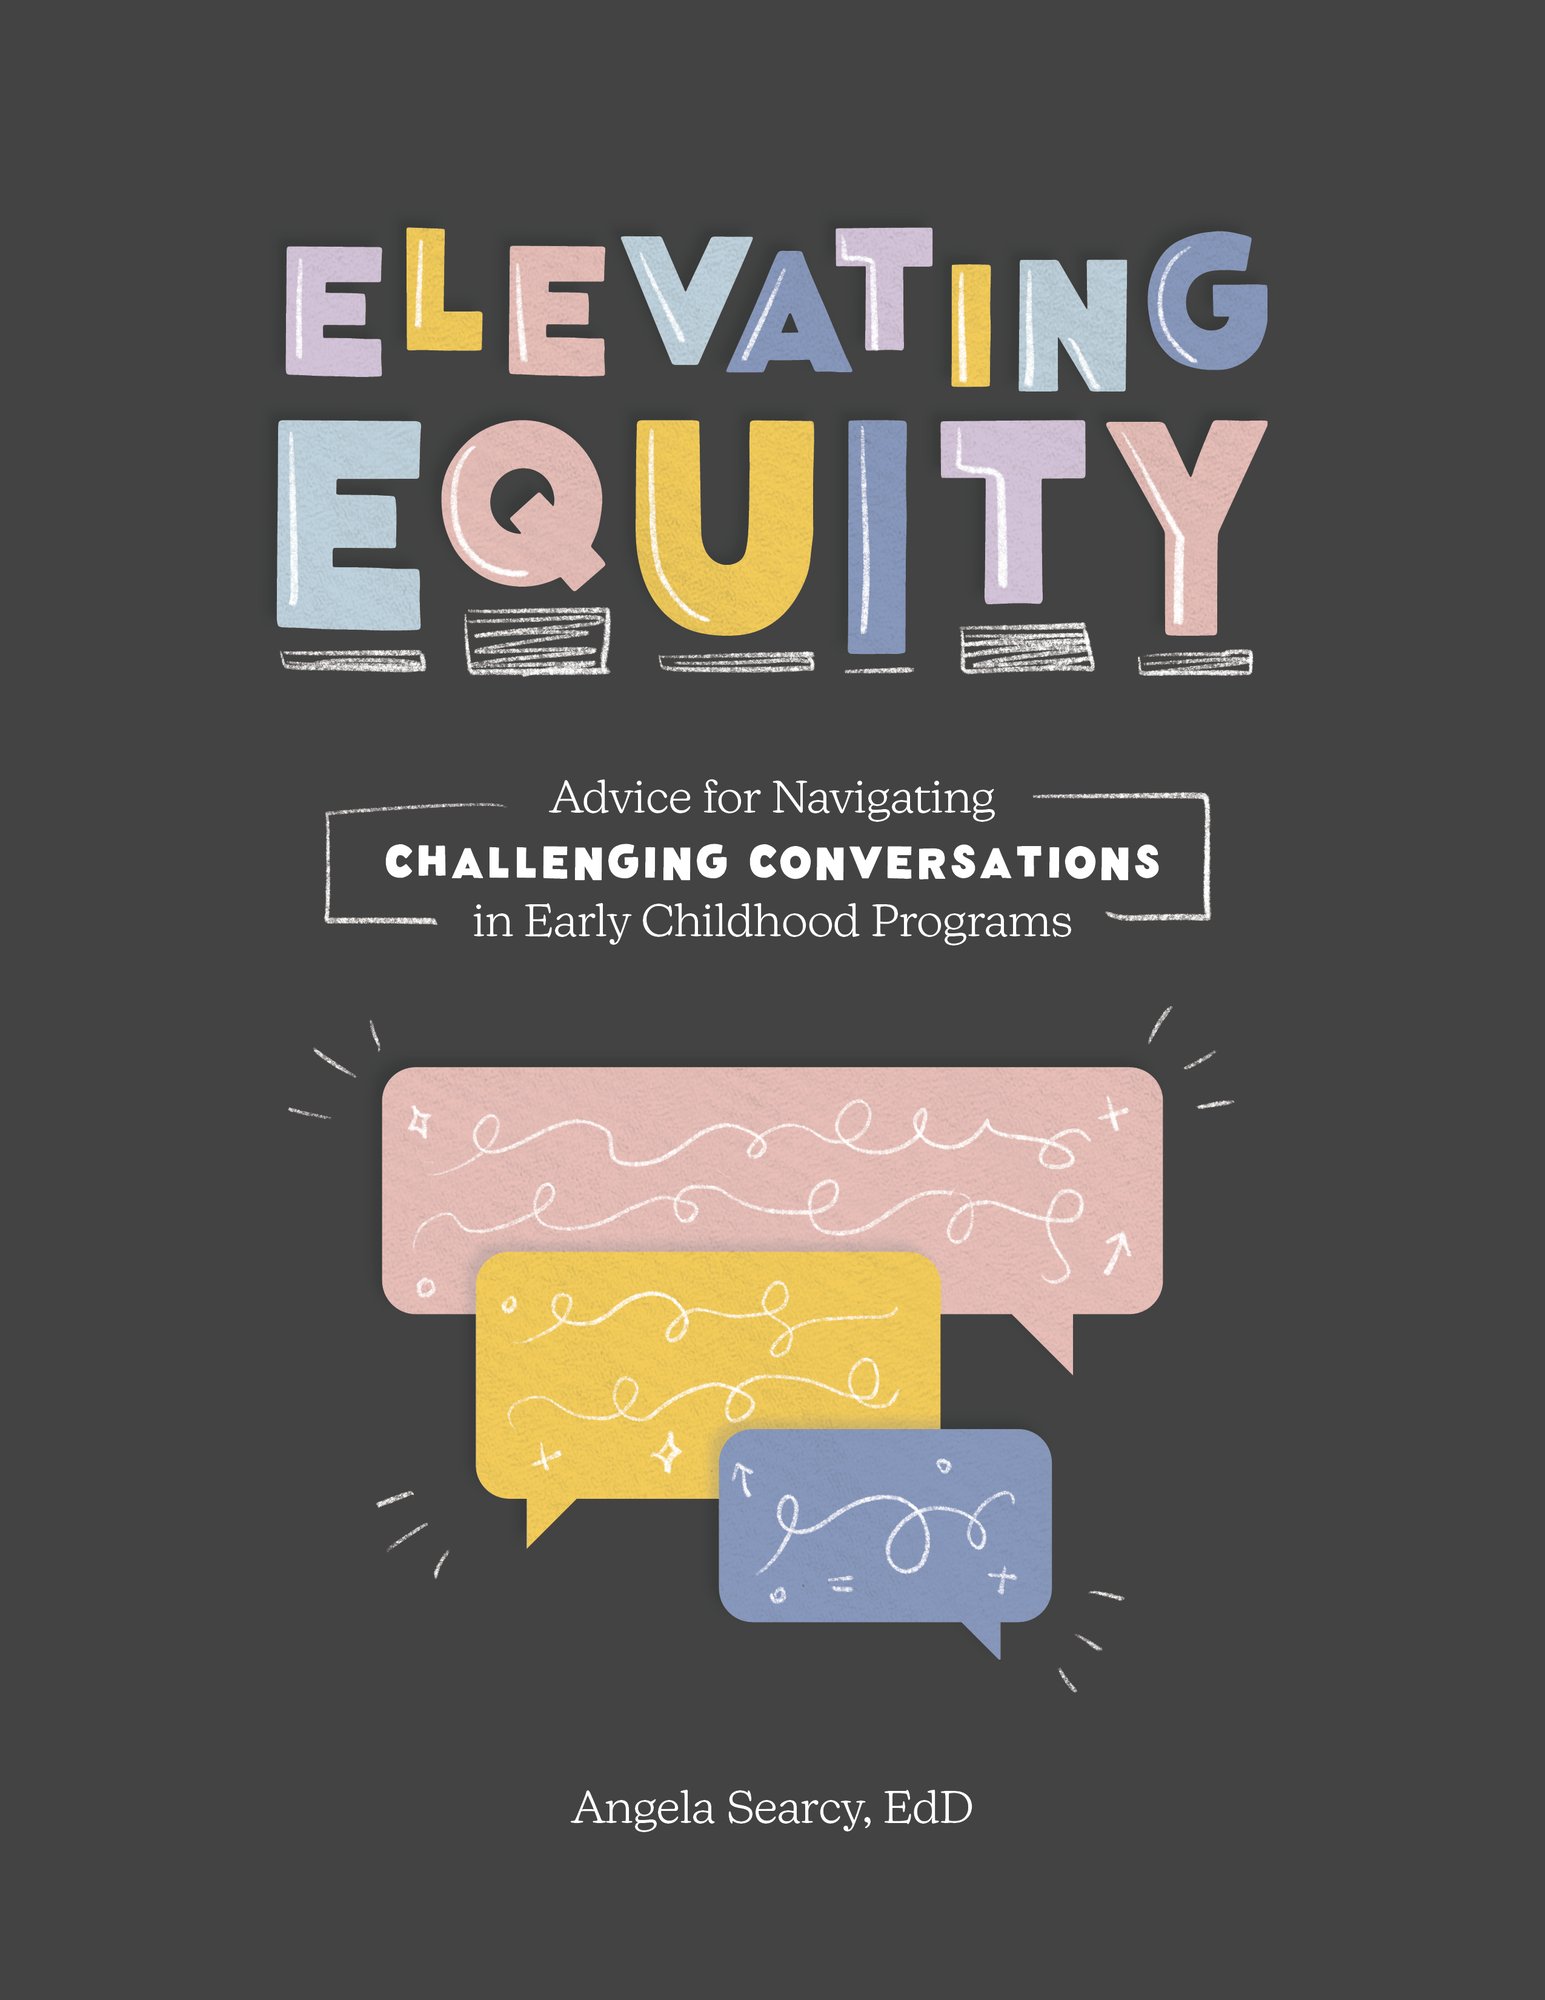 Cover of Advice for Navigating Challenging Conversations in Early Childhood Programs by Angela Searcy, EdD